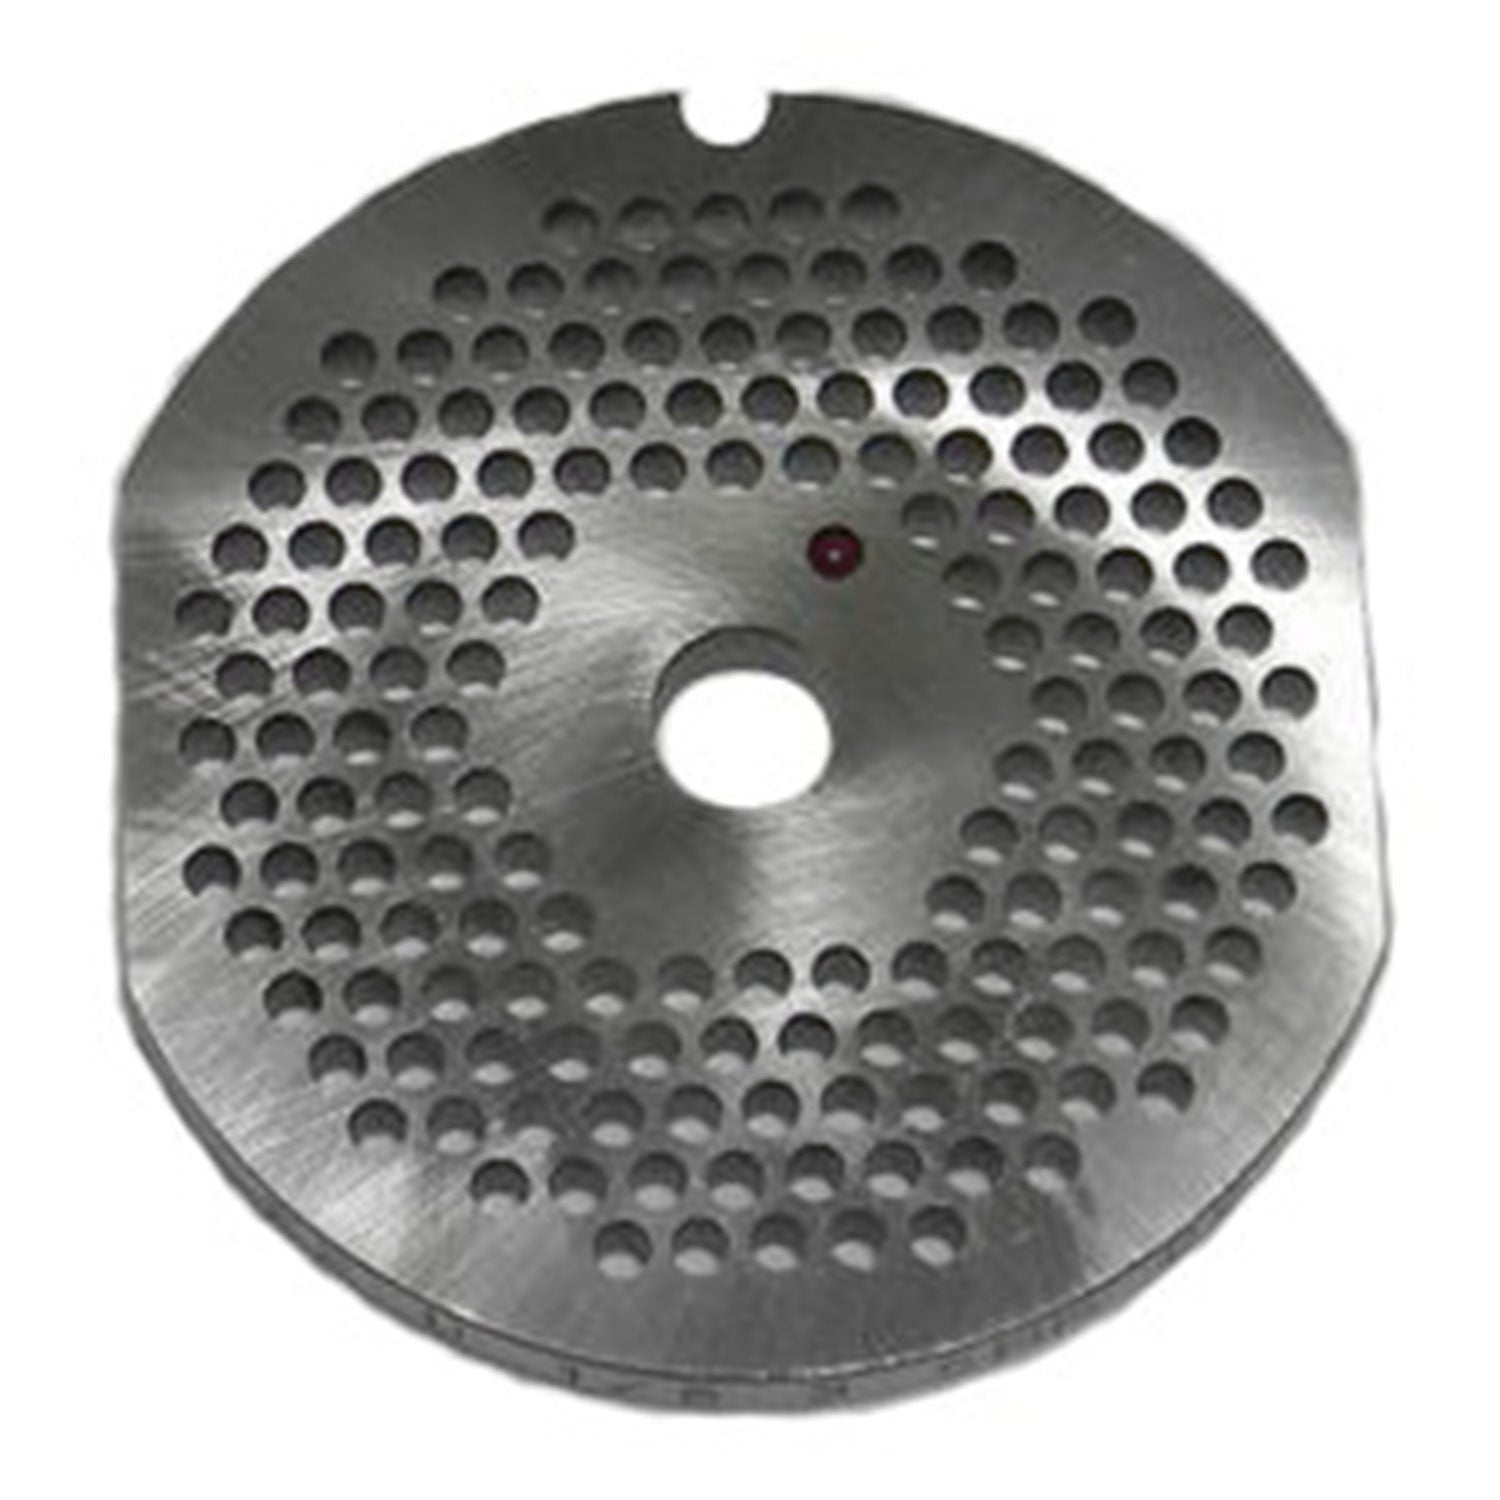 Size 22 Universal Reversible Meat Grinder Plate, 1/8